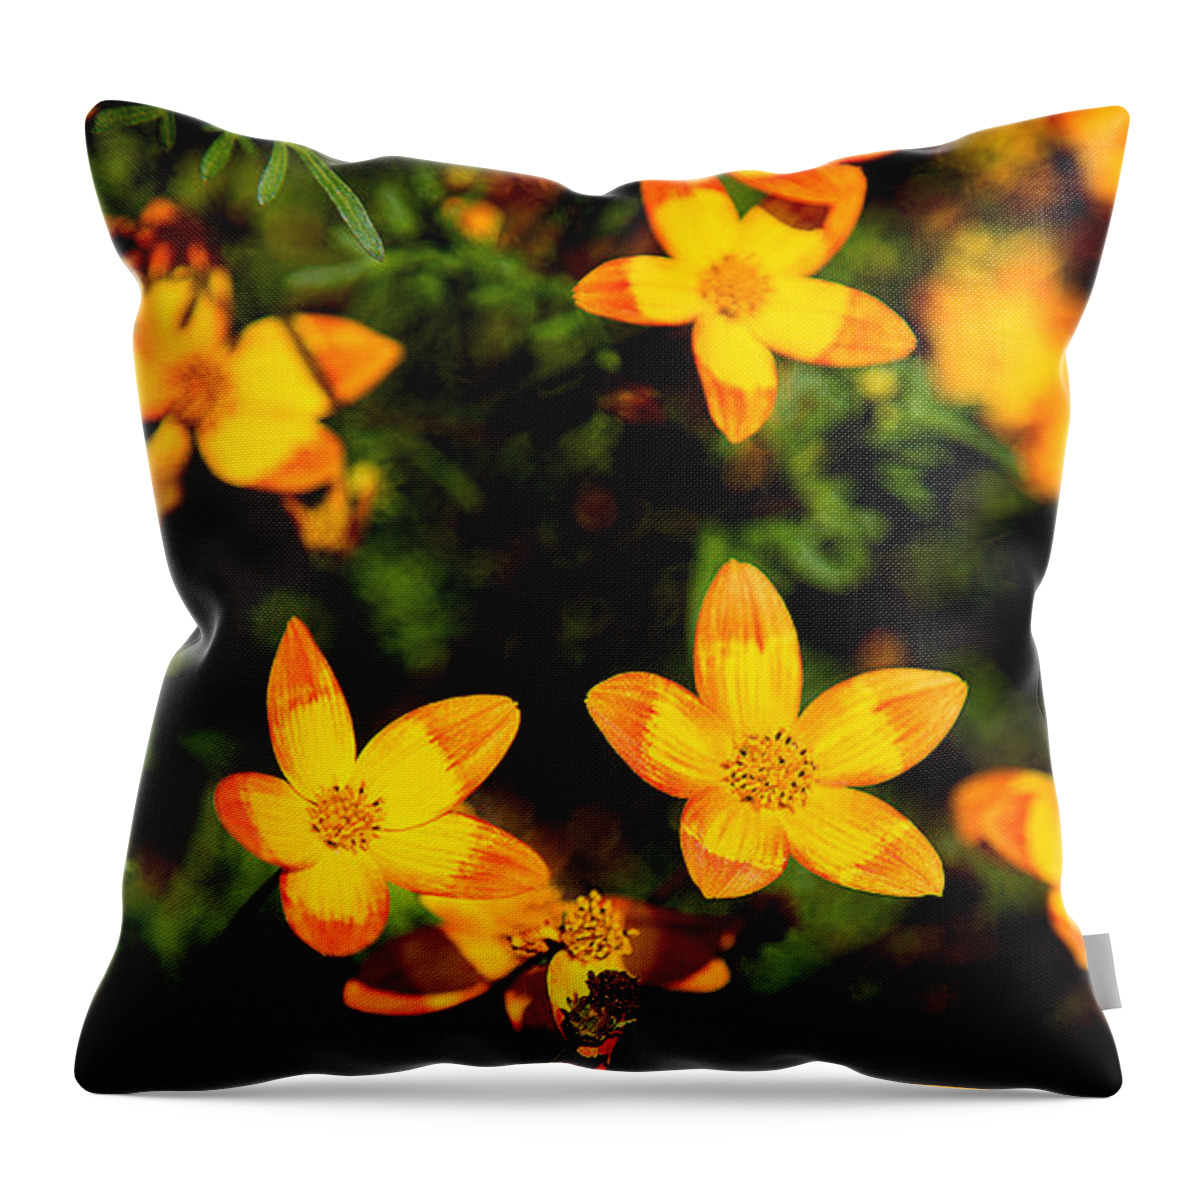 Yellow Flower Throw Pillow featuring the photograph Tiny Suns by Milena Ilieva